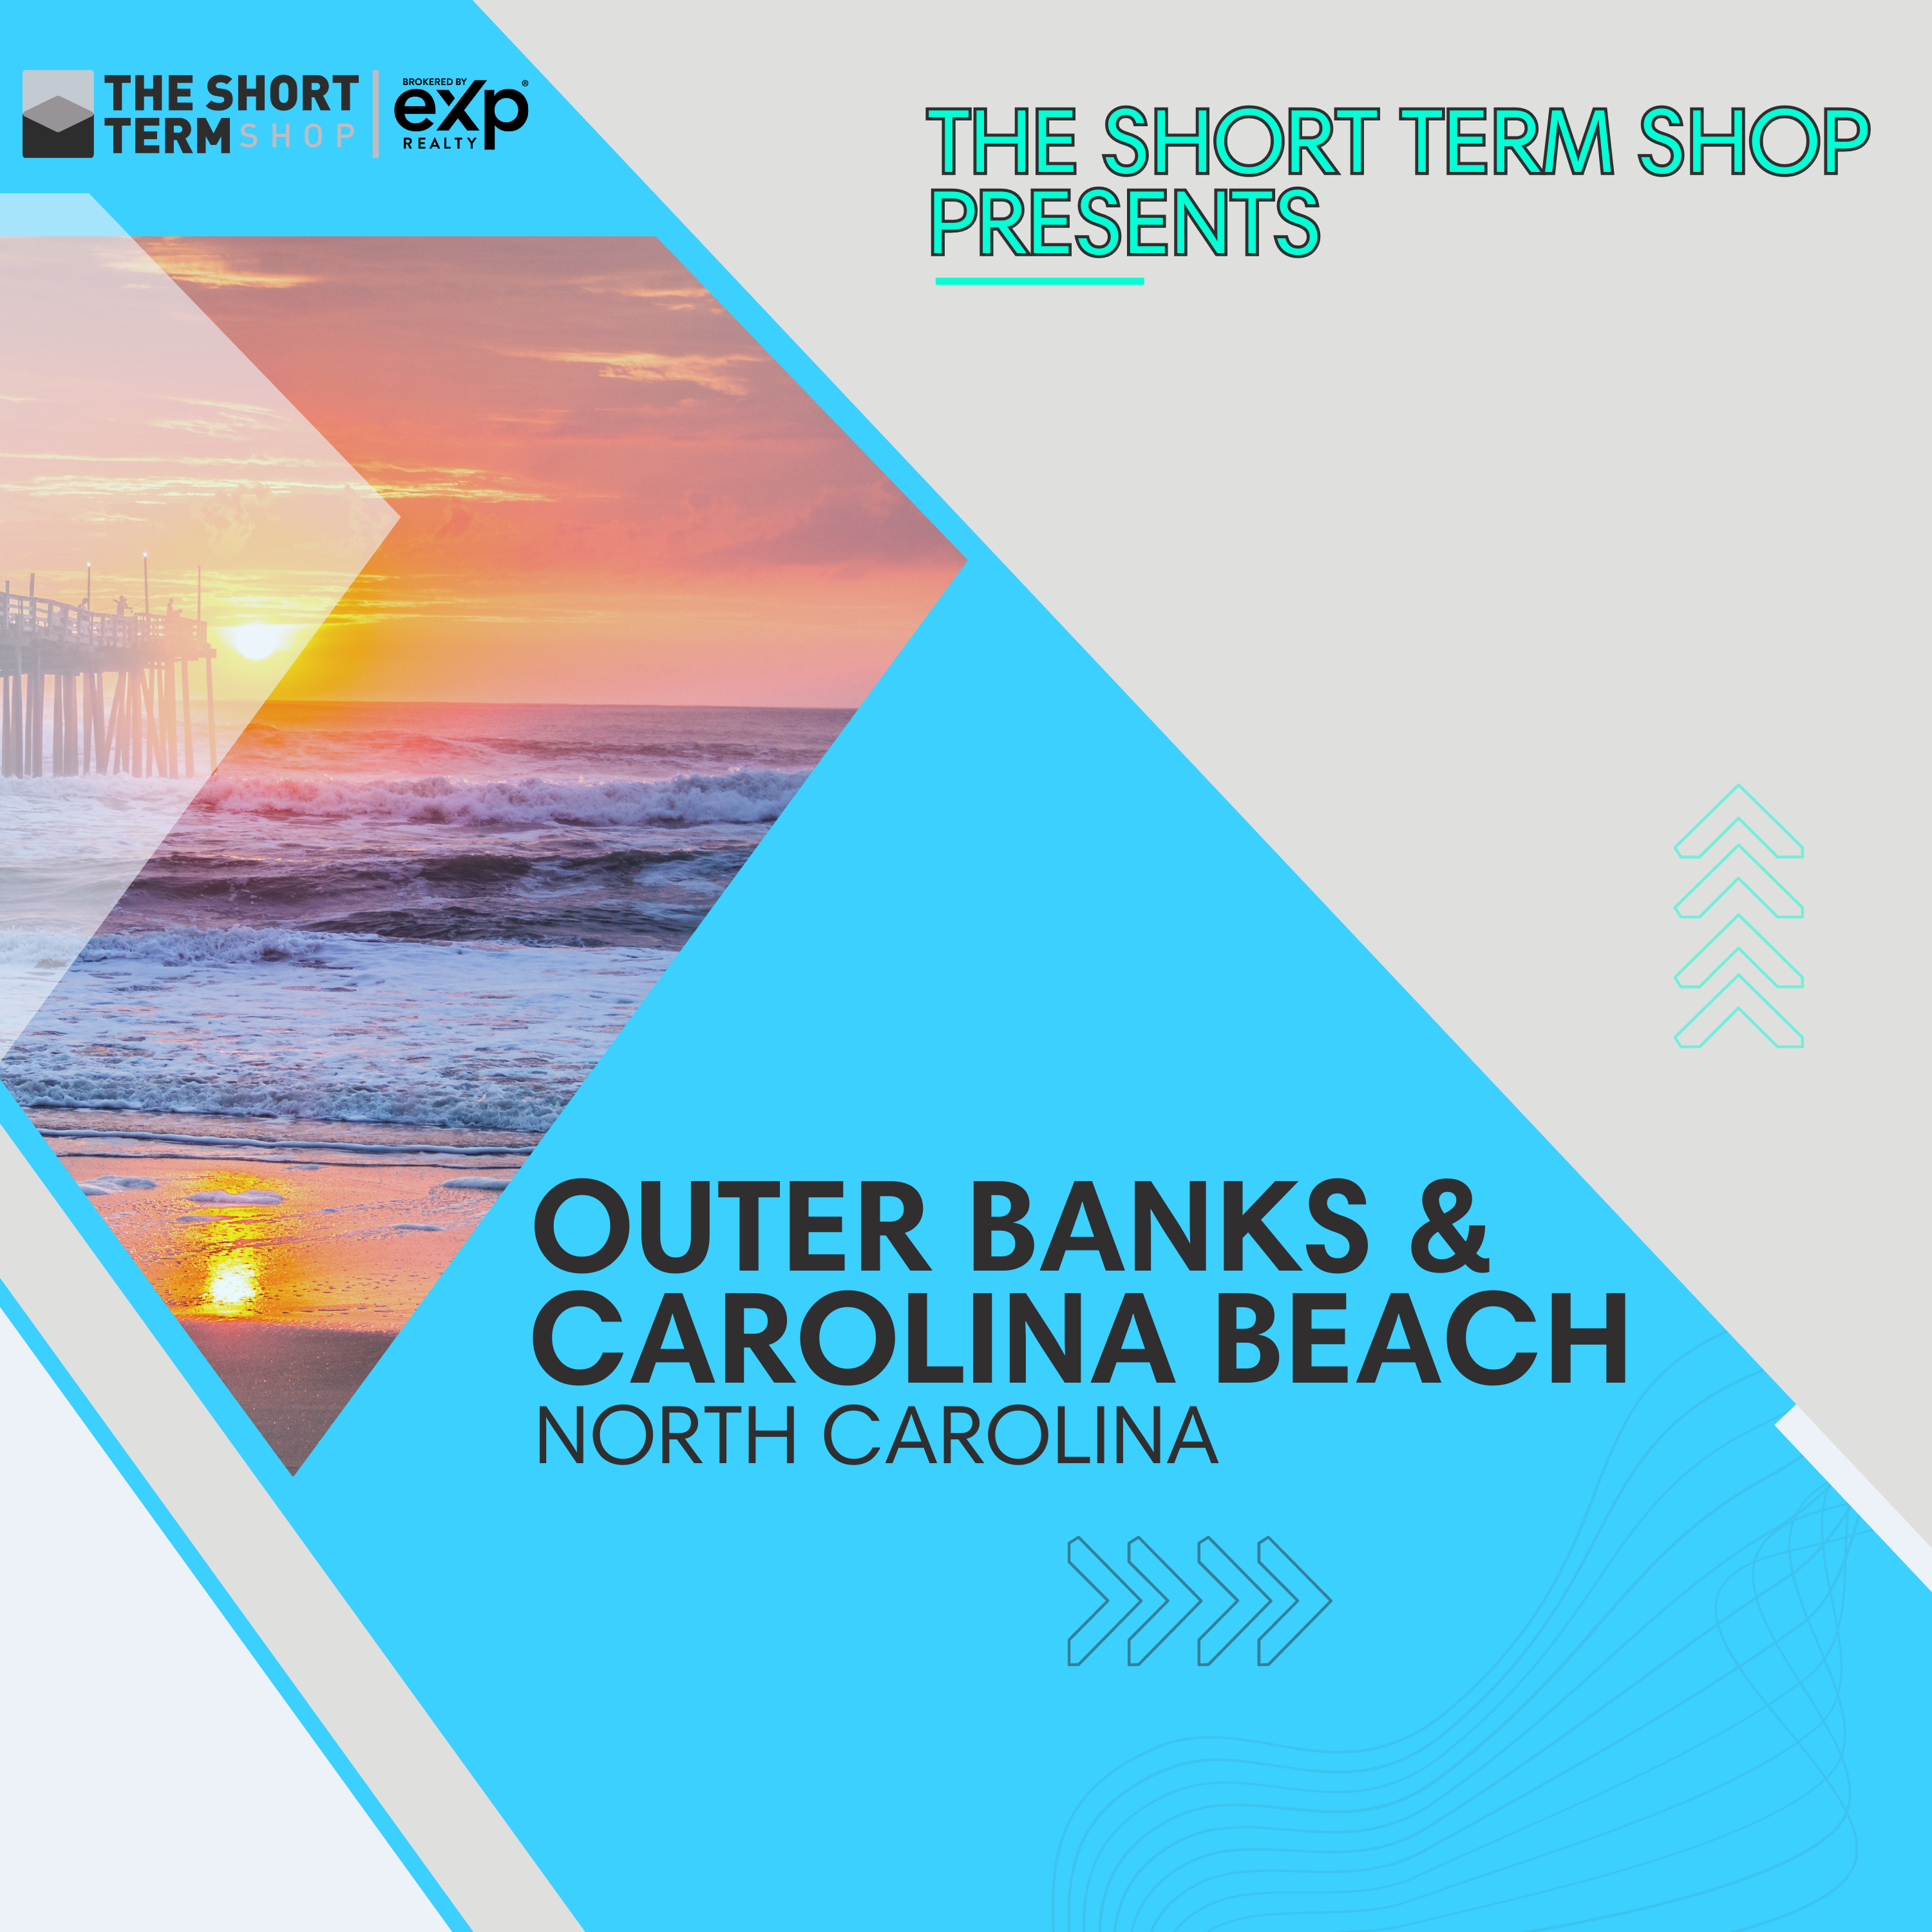 Buying an Airbnb in the Outer Banks and Carolina Beach, NC